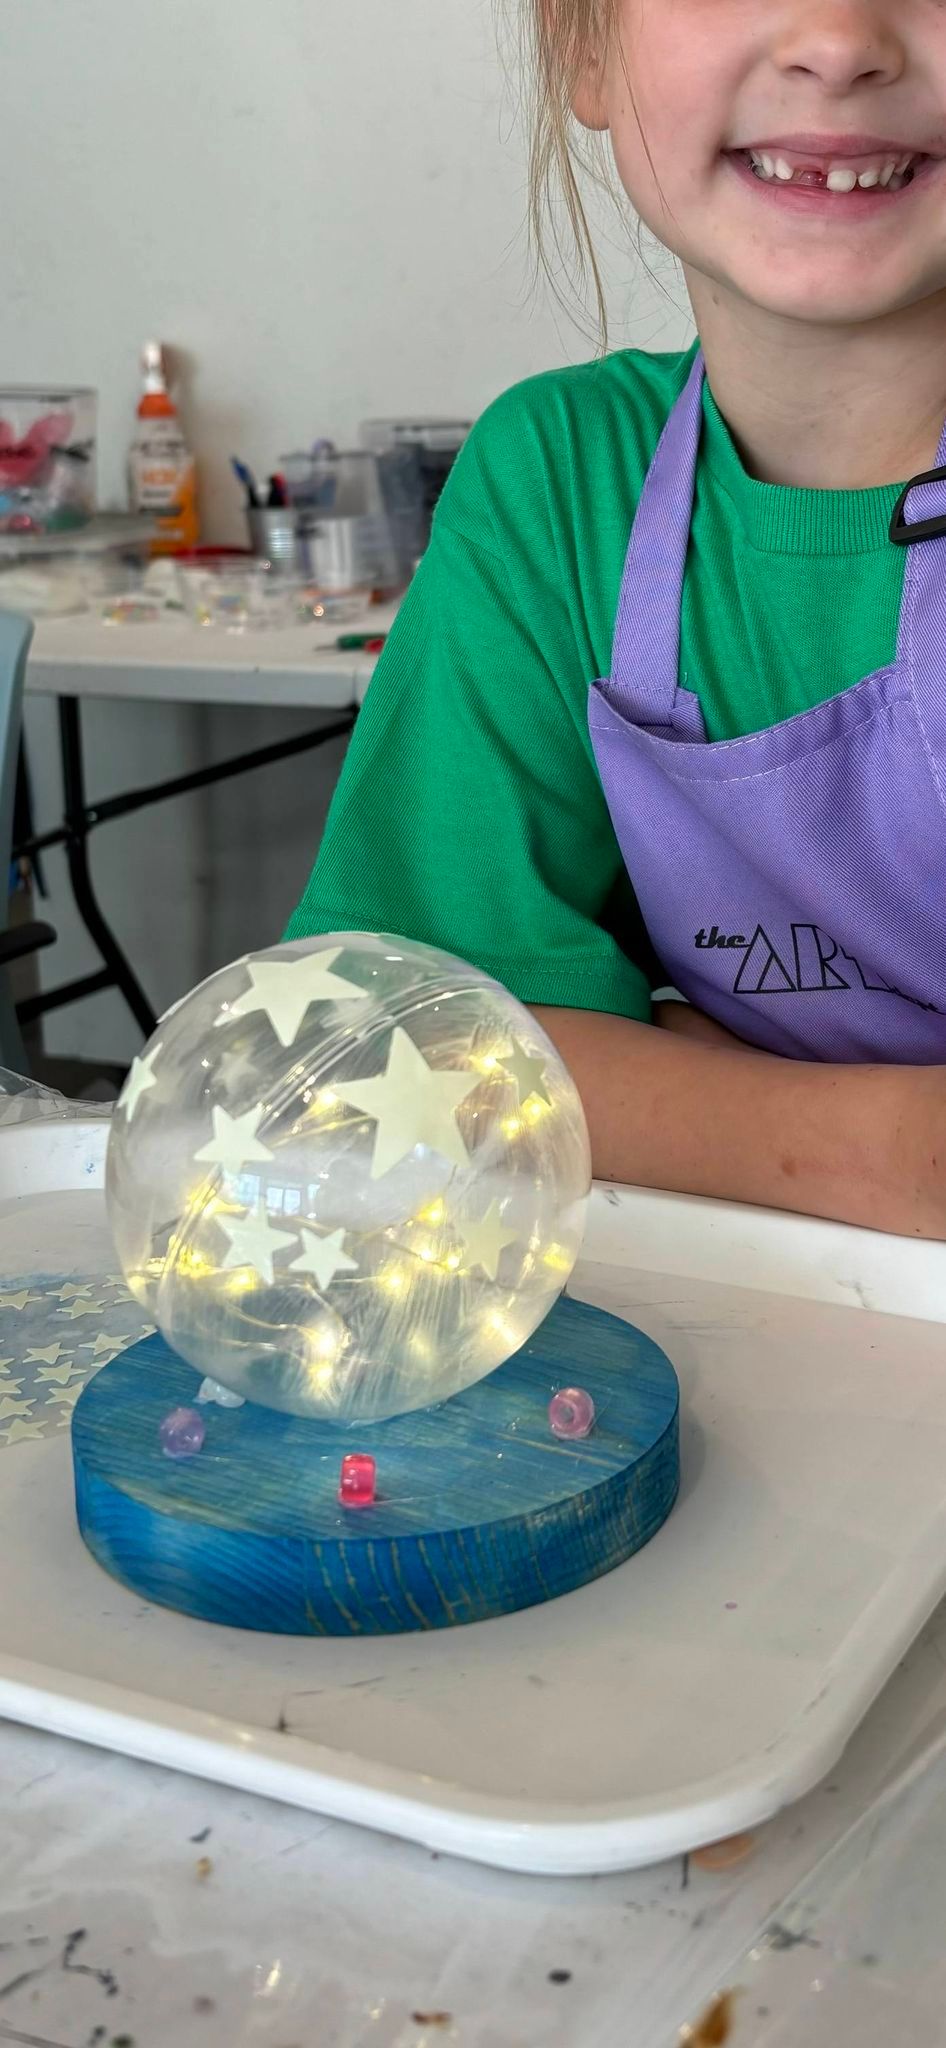 Let's Glow Mini Camp - Art Summer Camp for Kids 5-10 Years Old